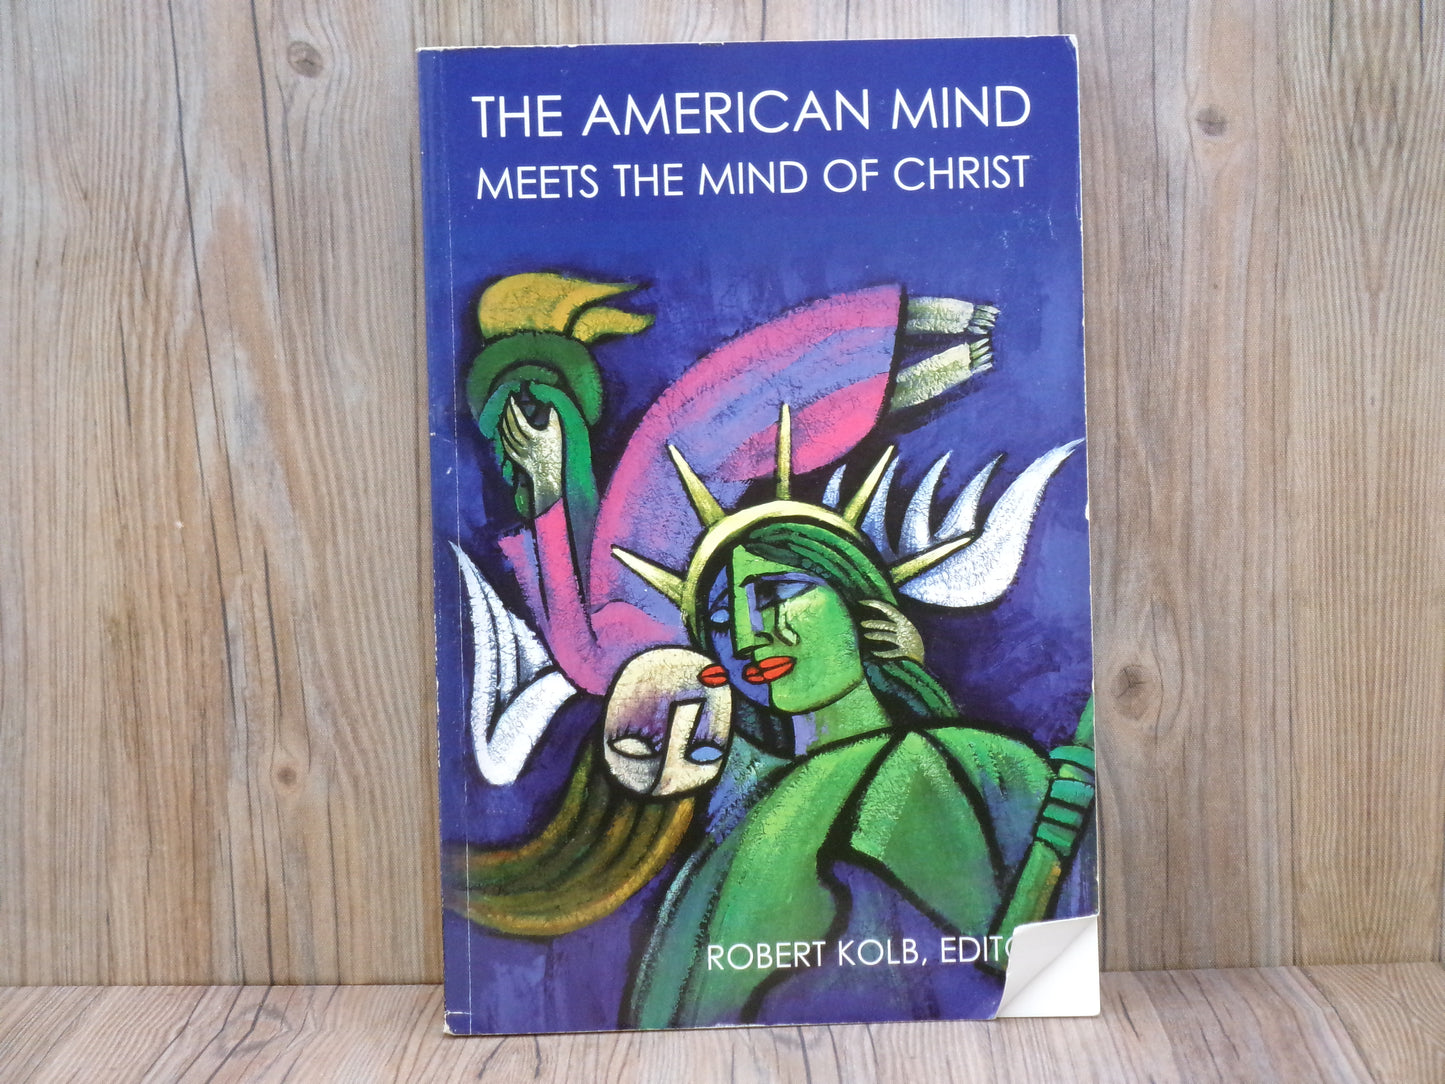 The American Mind Meets The Mind of Christ by Robert Kolb